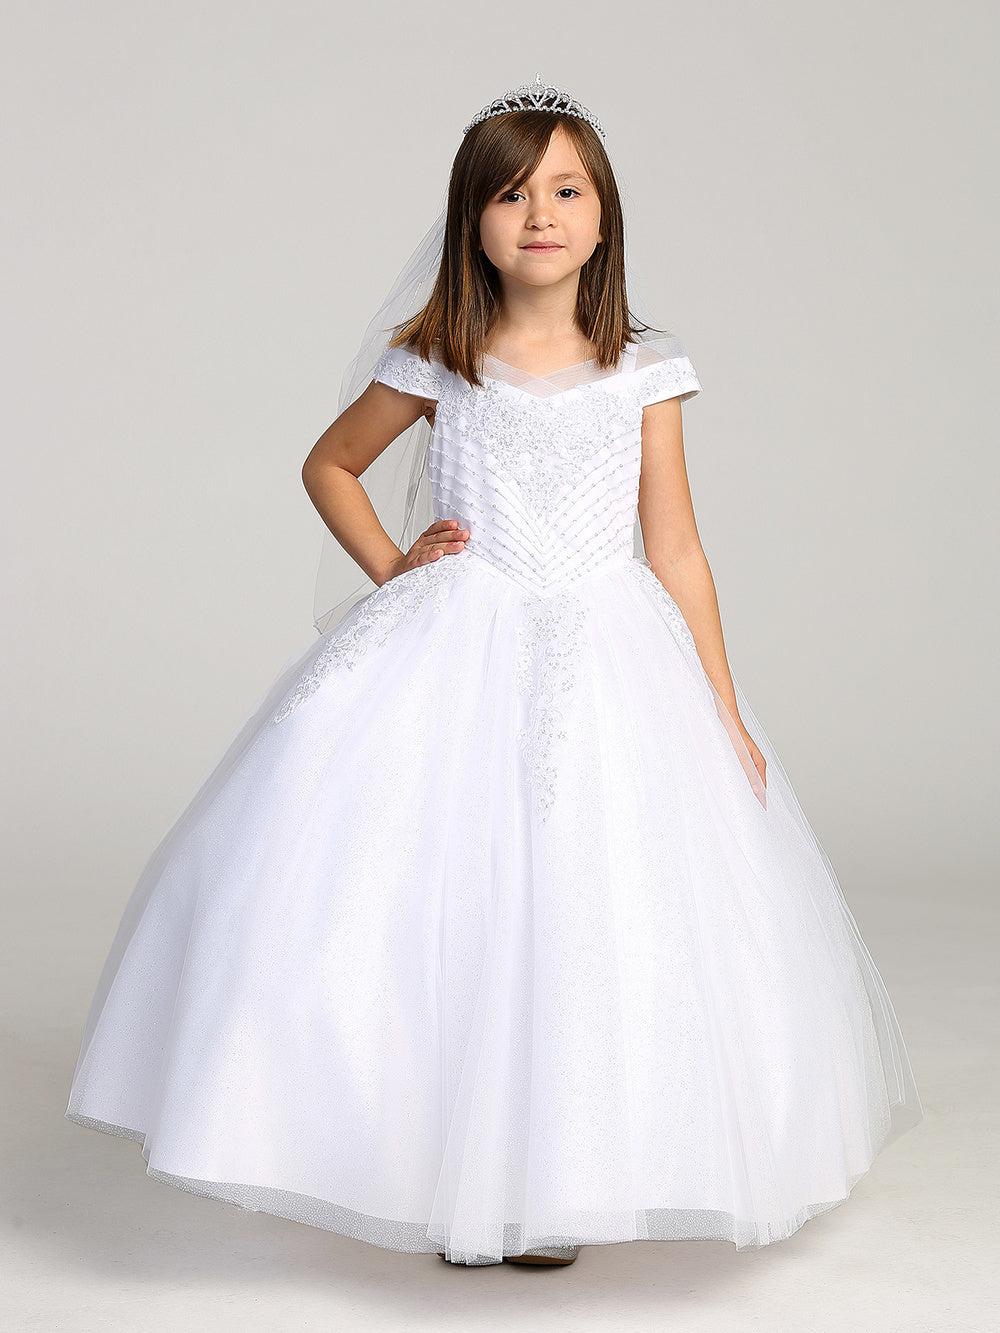 White Girl Dress with Sequins Off-Shoulder Bodice - AS7035